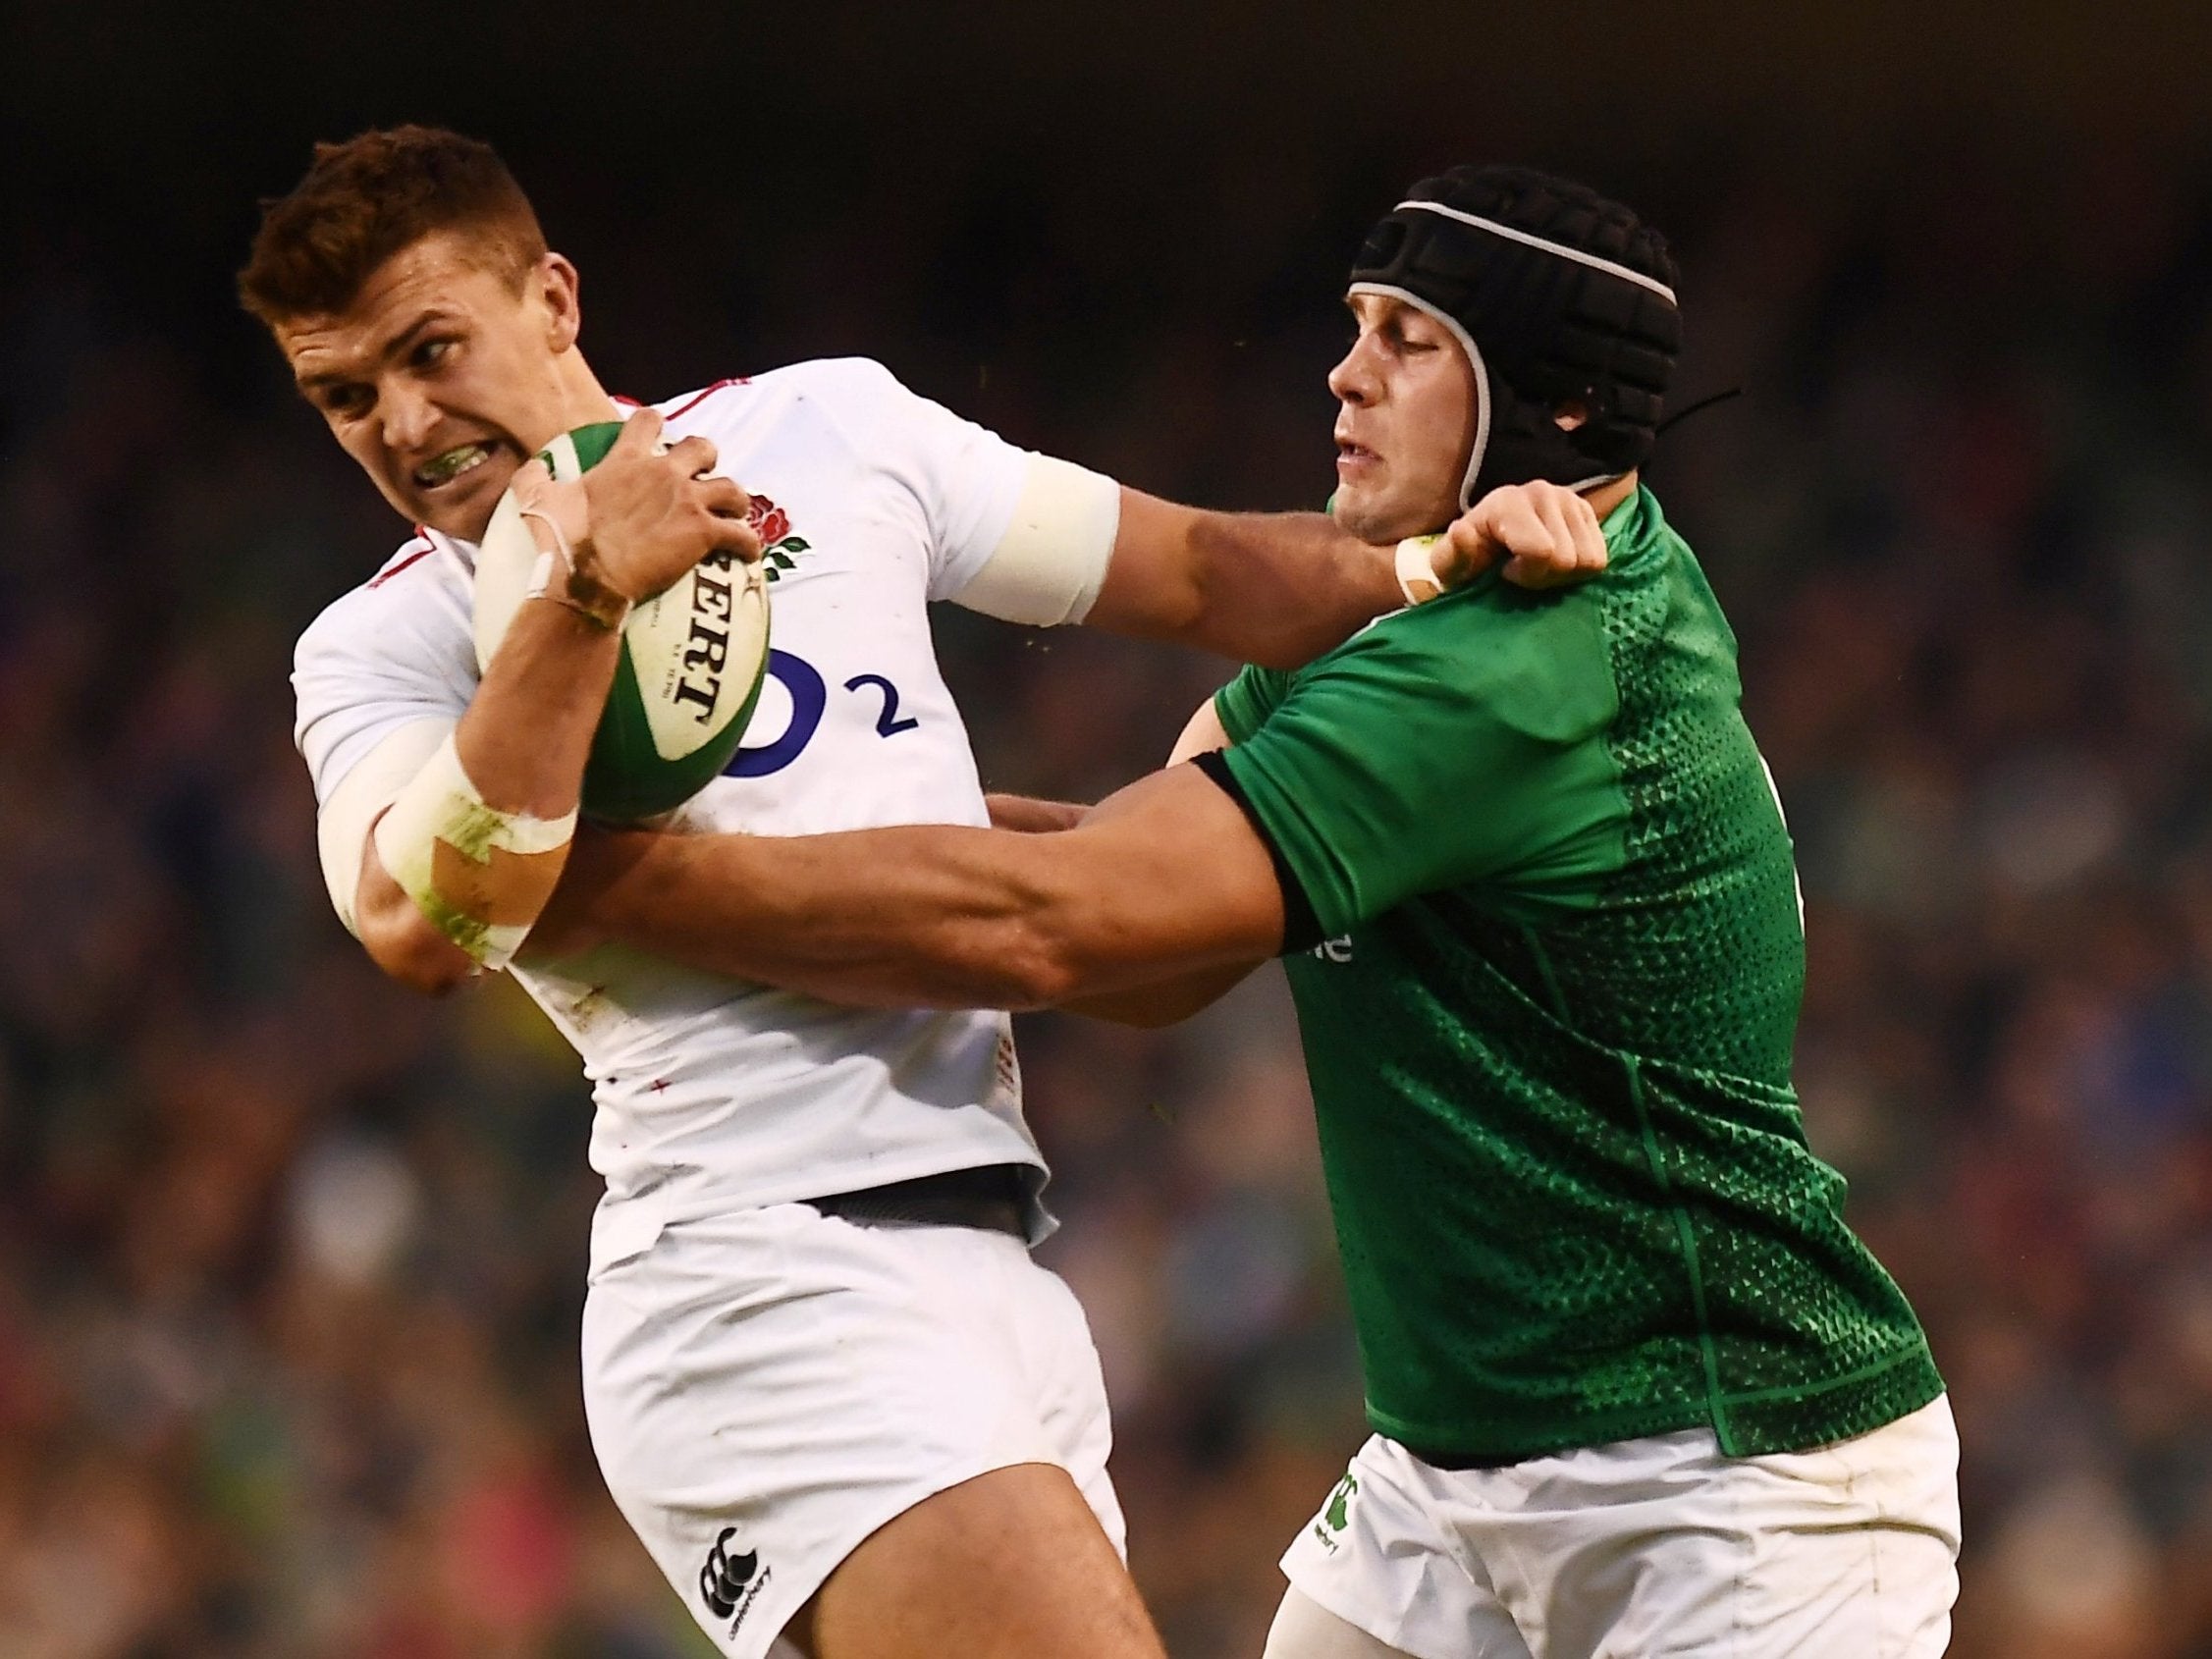 CJ Stander (right) suffered a facial injury that will rule him out for up to four weeks